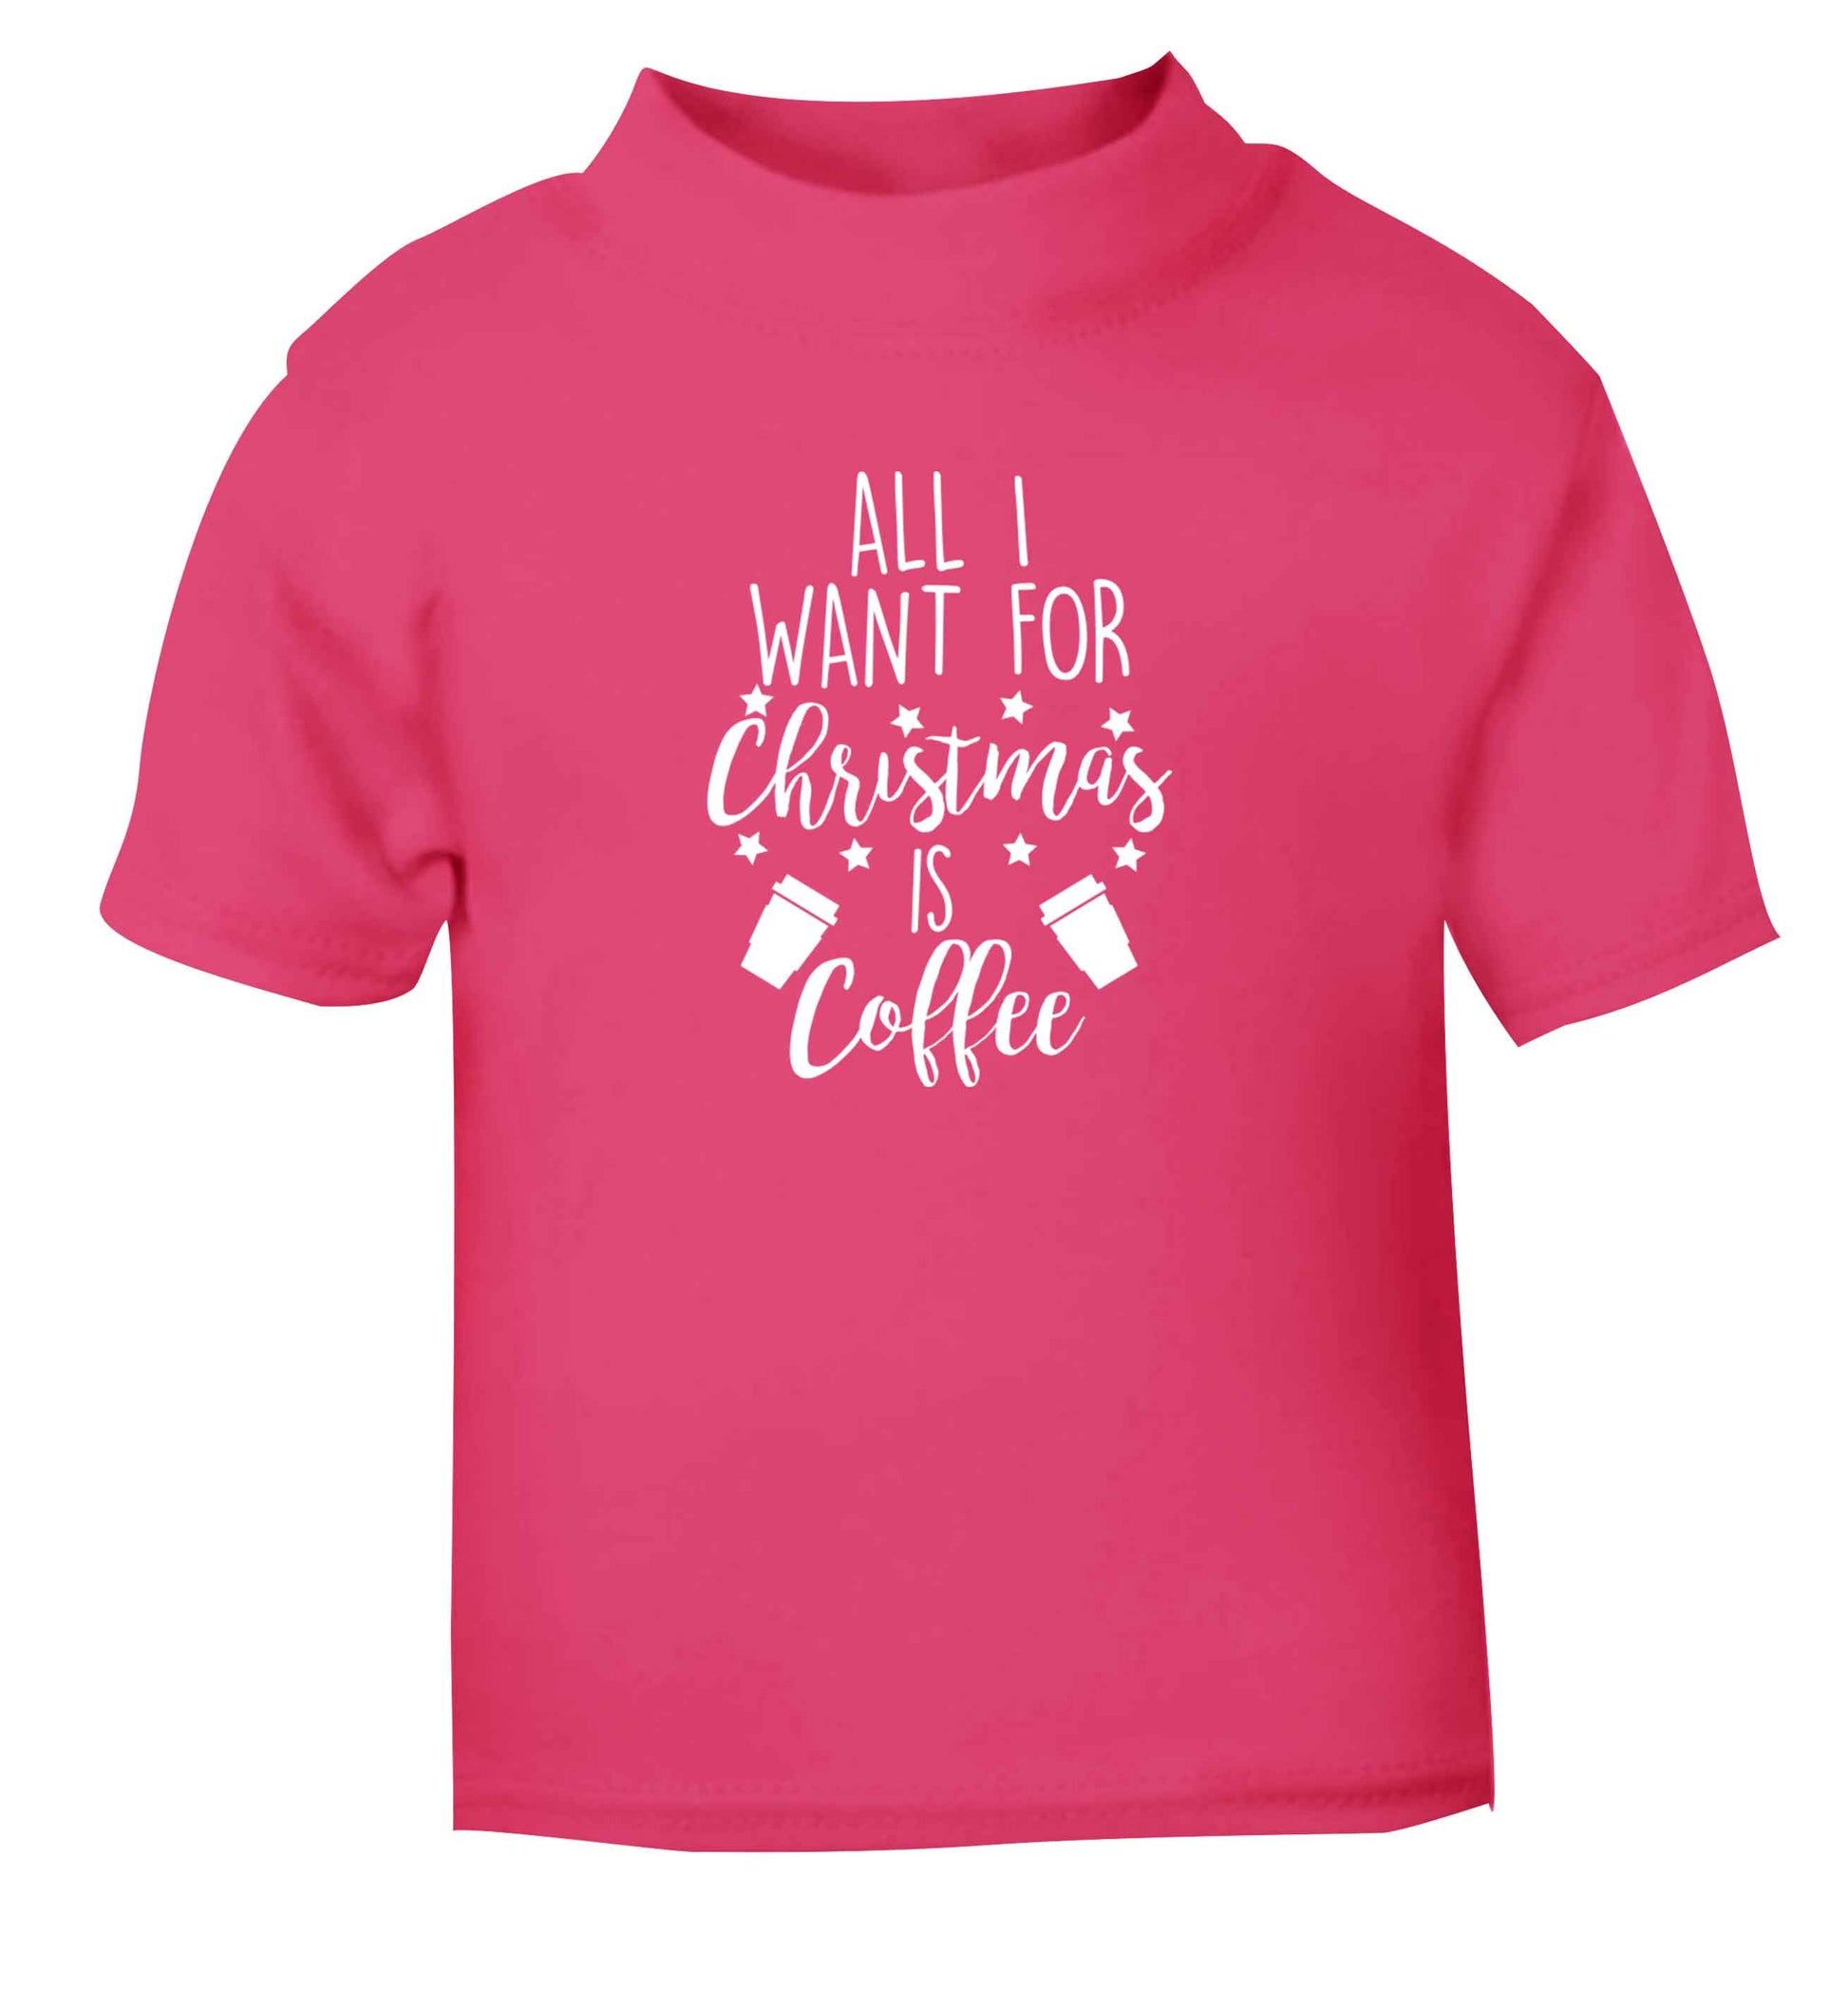 All I want for Christmas is coffee pink Baby Toddler Tshirt 2 Years